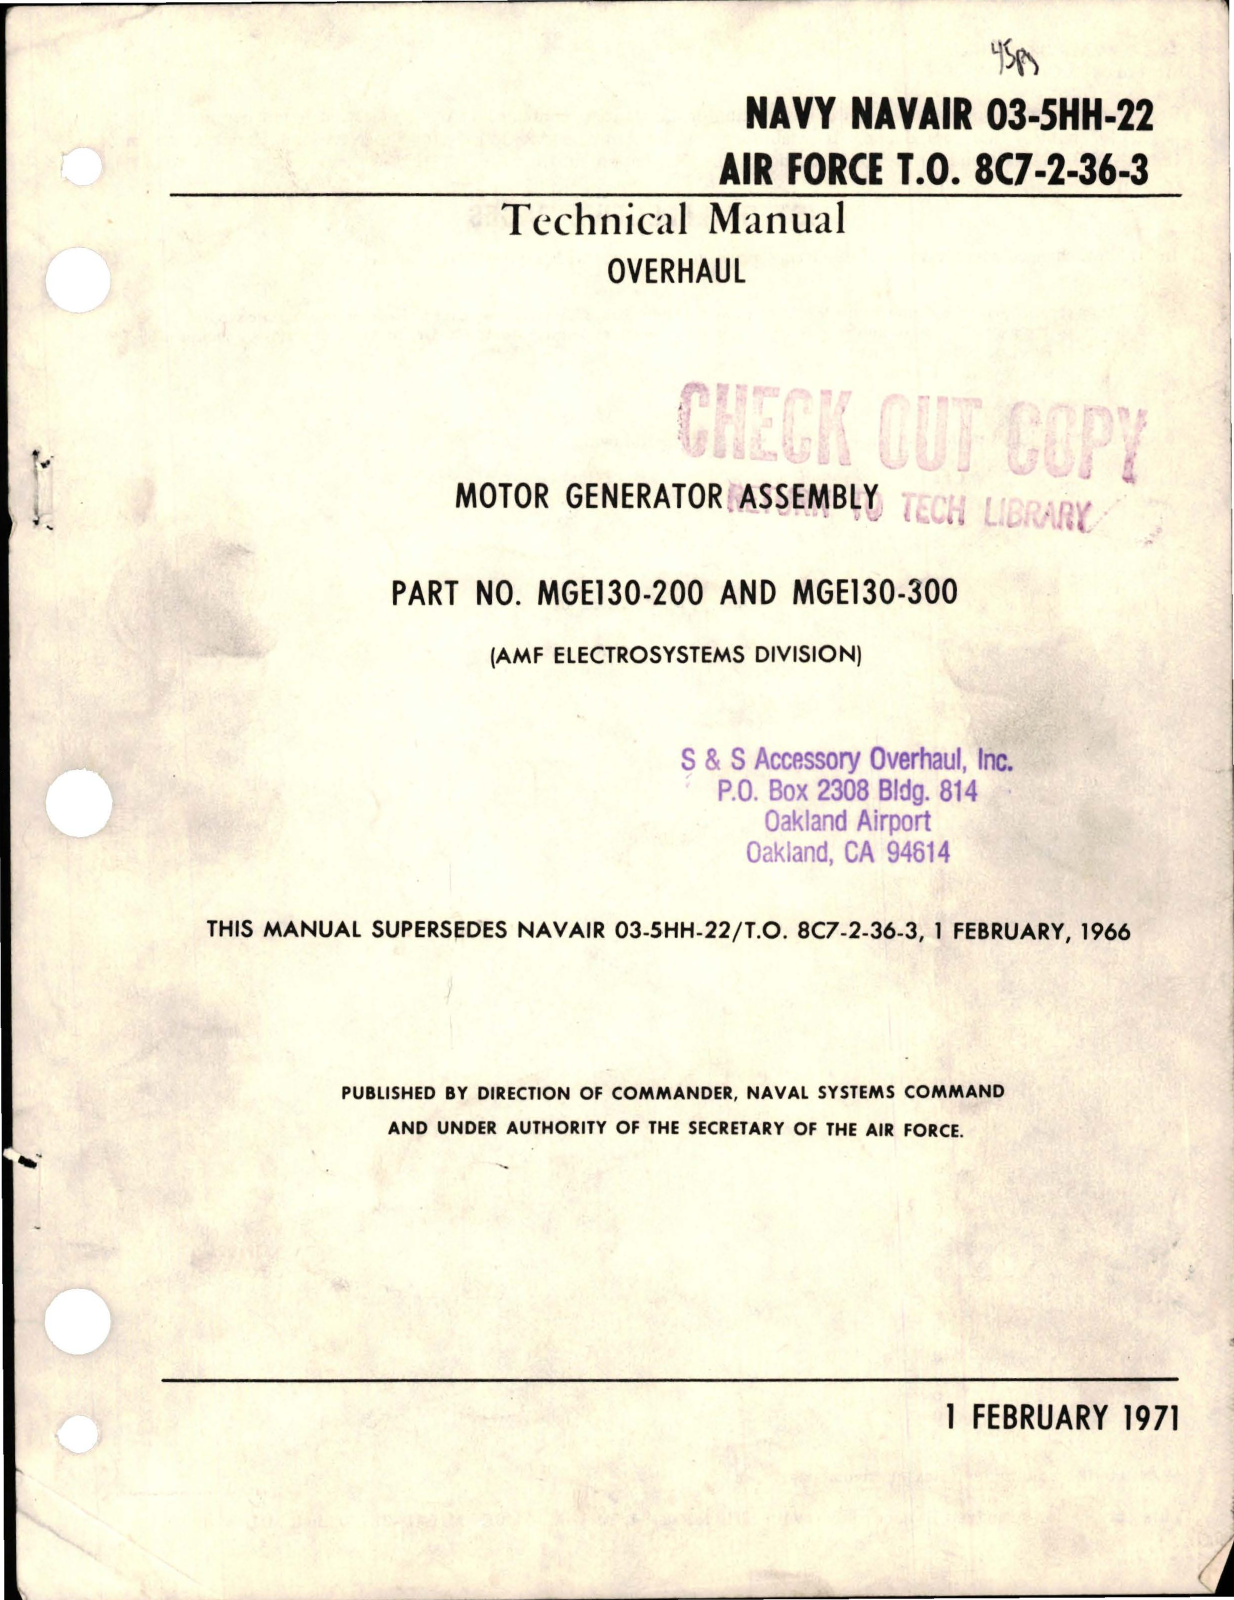 Sample page 1 from AirCorps Library document: Overhaul for Motor Generator Assembly - Part MGE130-200 and MGE130-300 